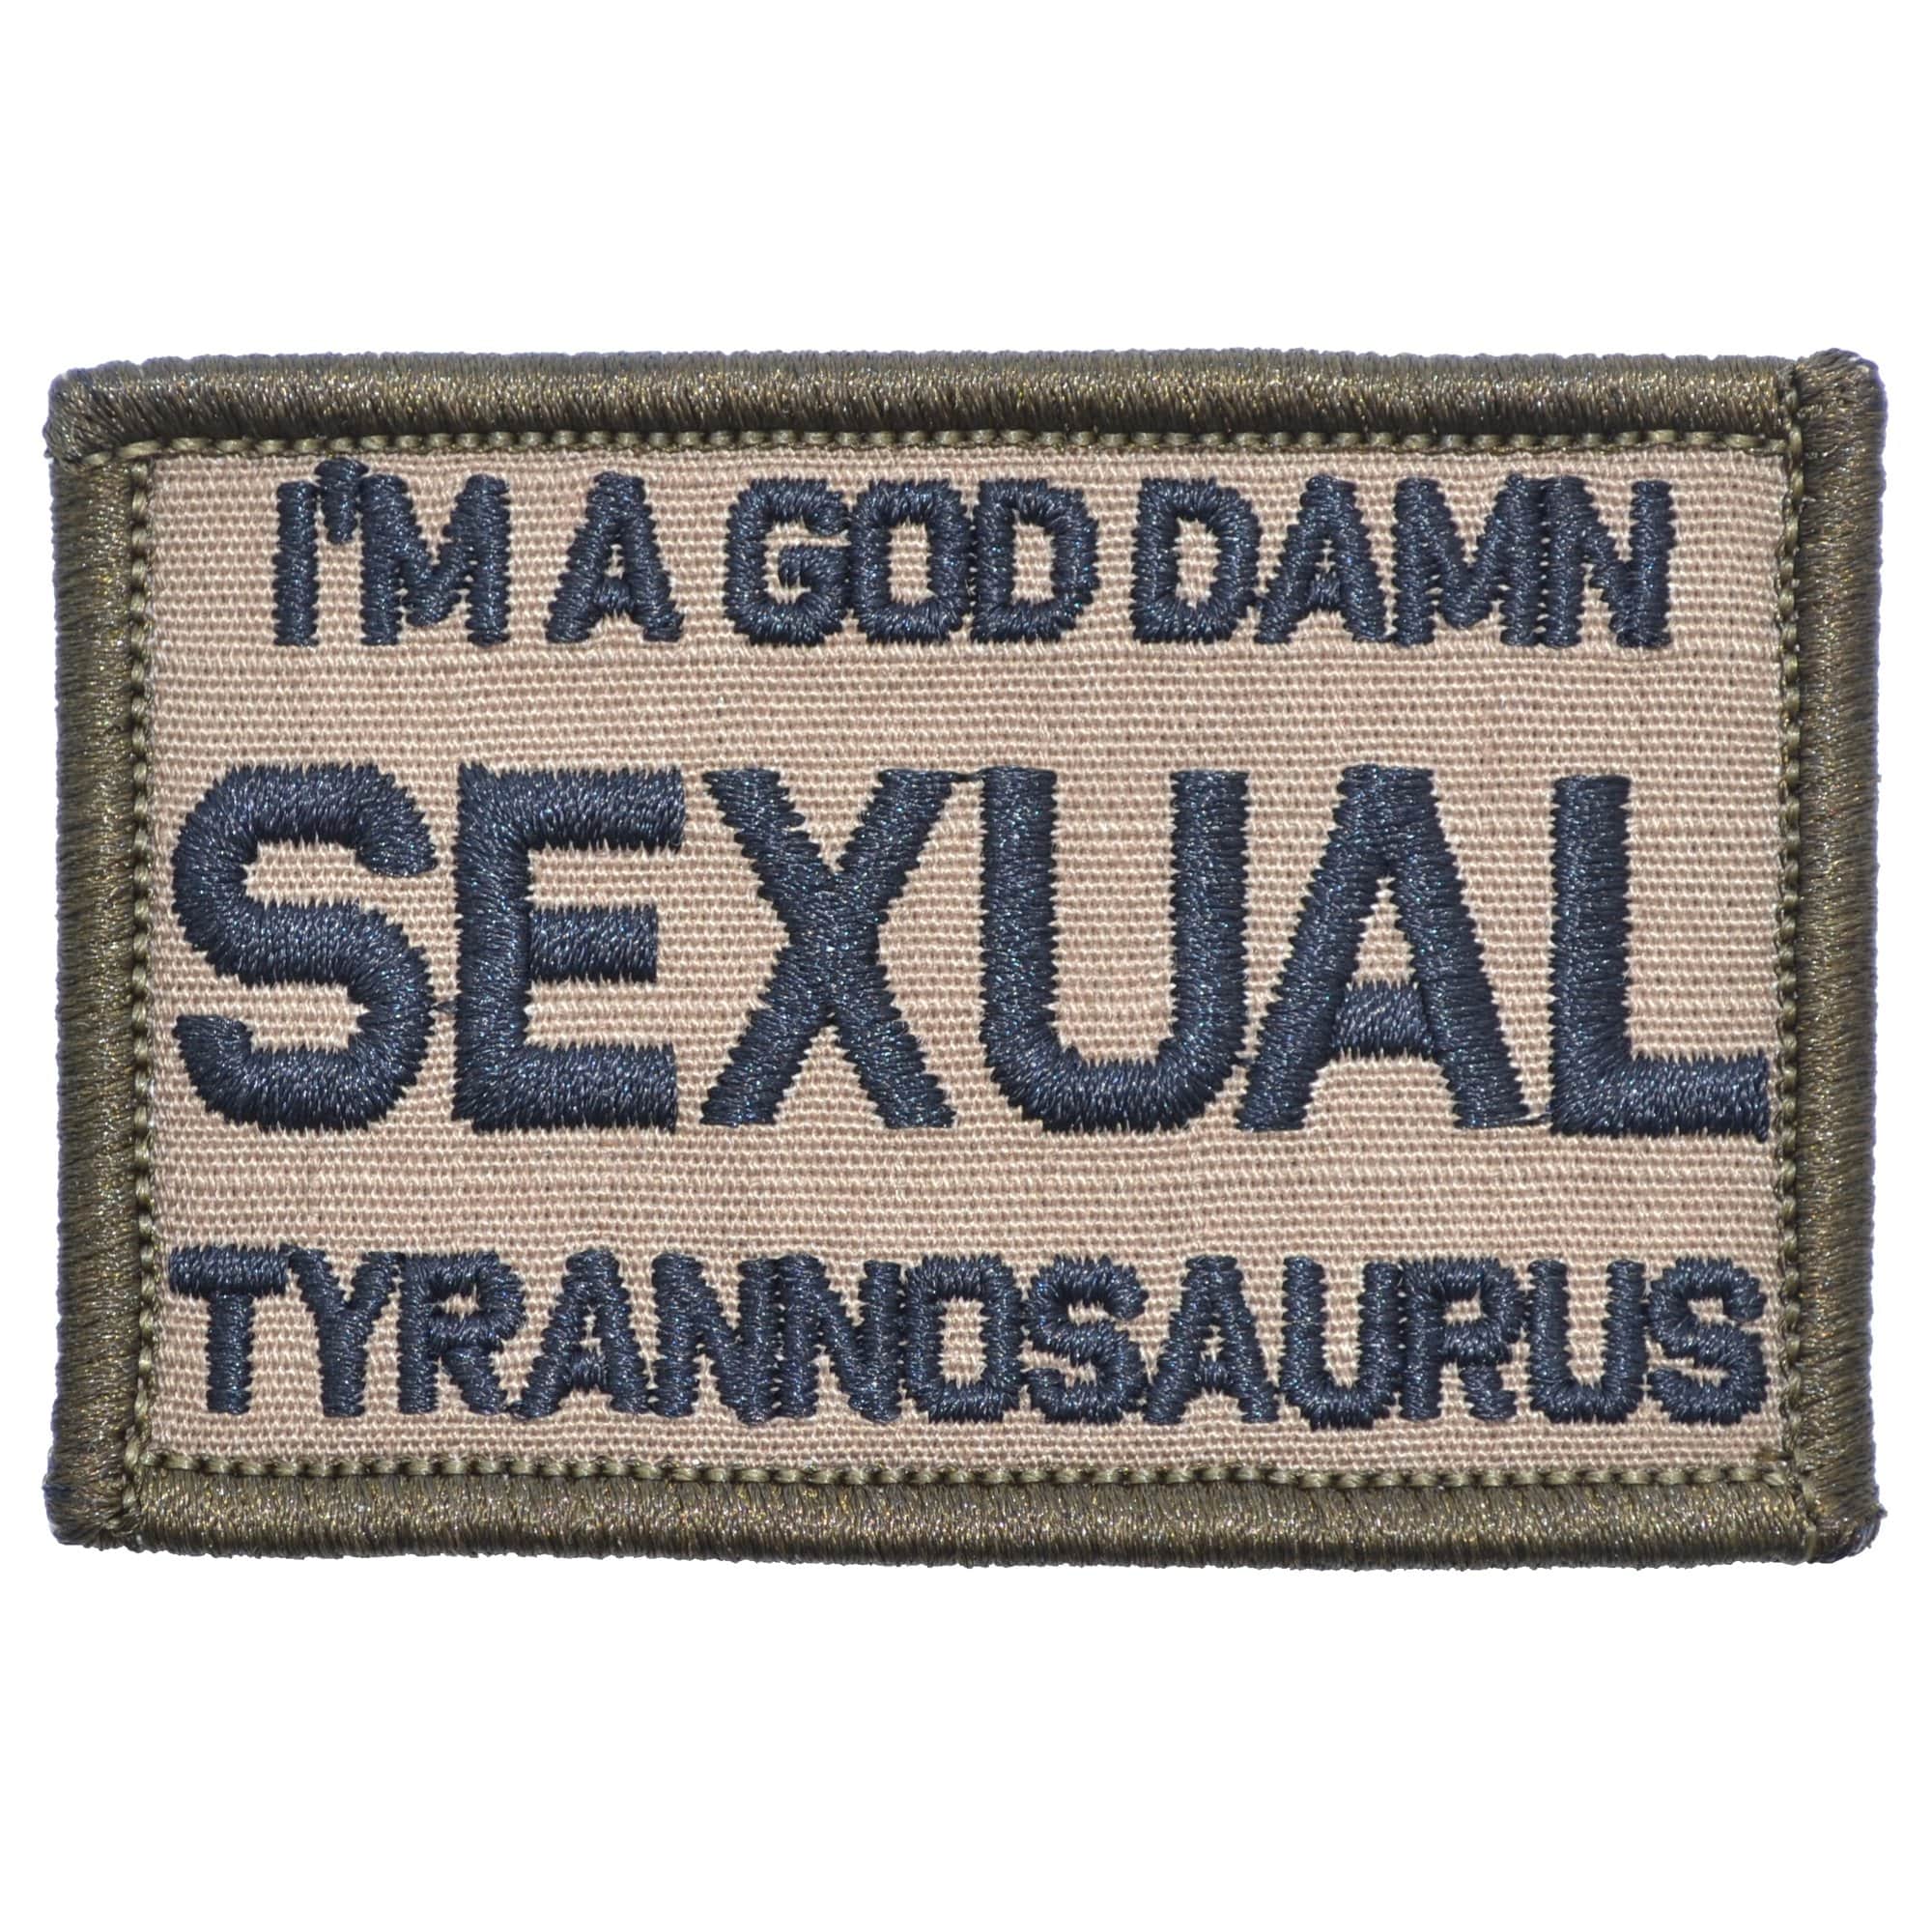 Tactical Gear Junkie Patches Coyote Brown w/ Black I'm a God Damn Sexual Tyrannosaurus - 2x3 Patch